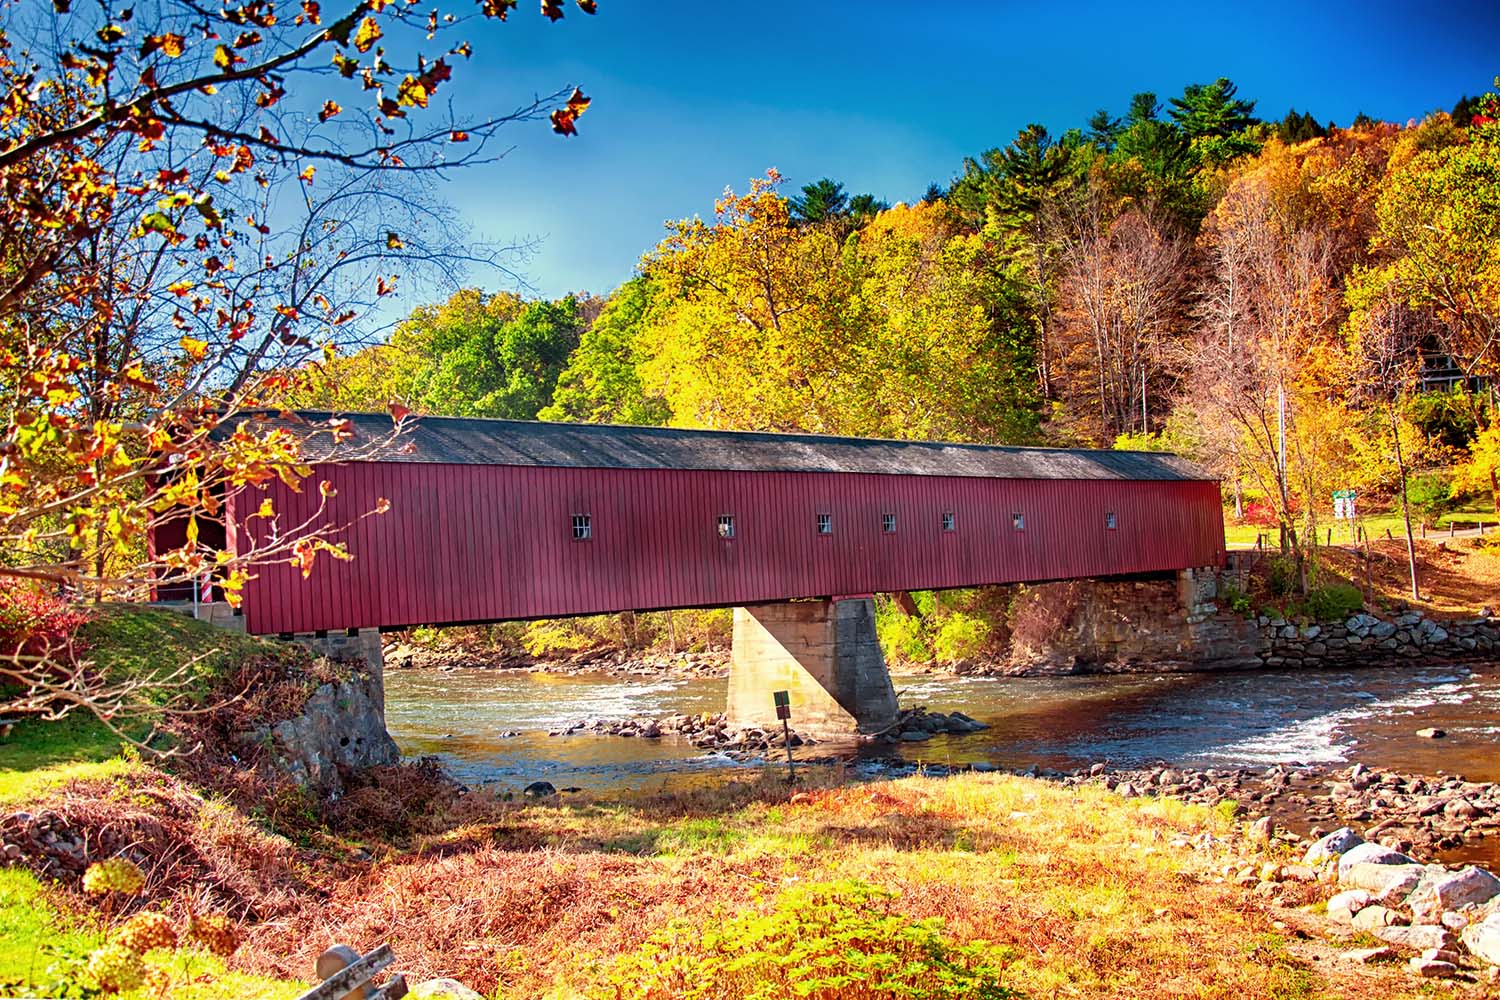 West Cornwall Covered Bridge in Connecticut, USA